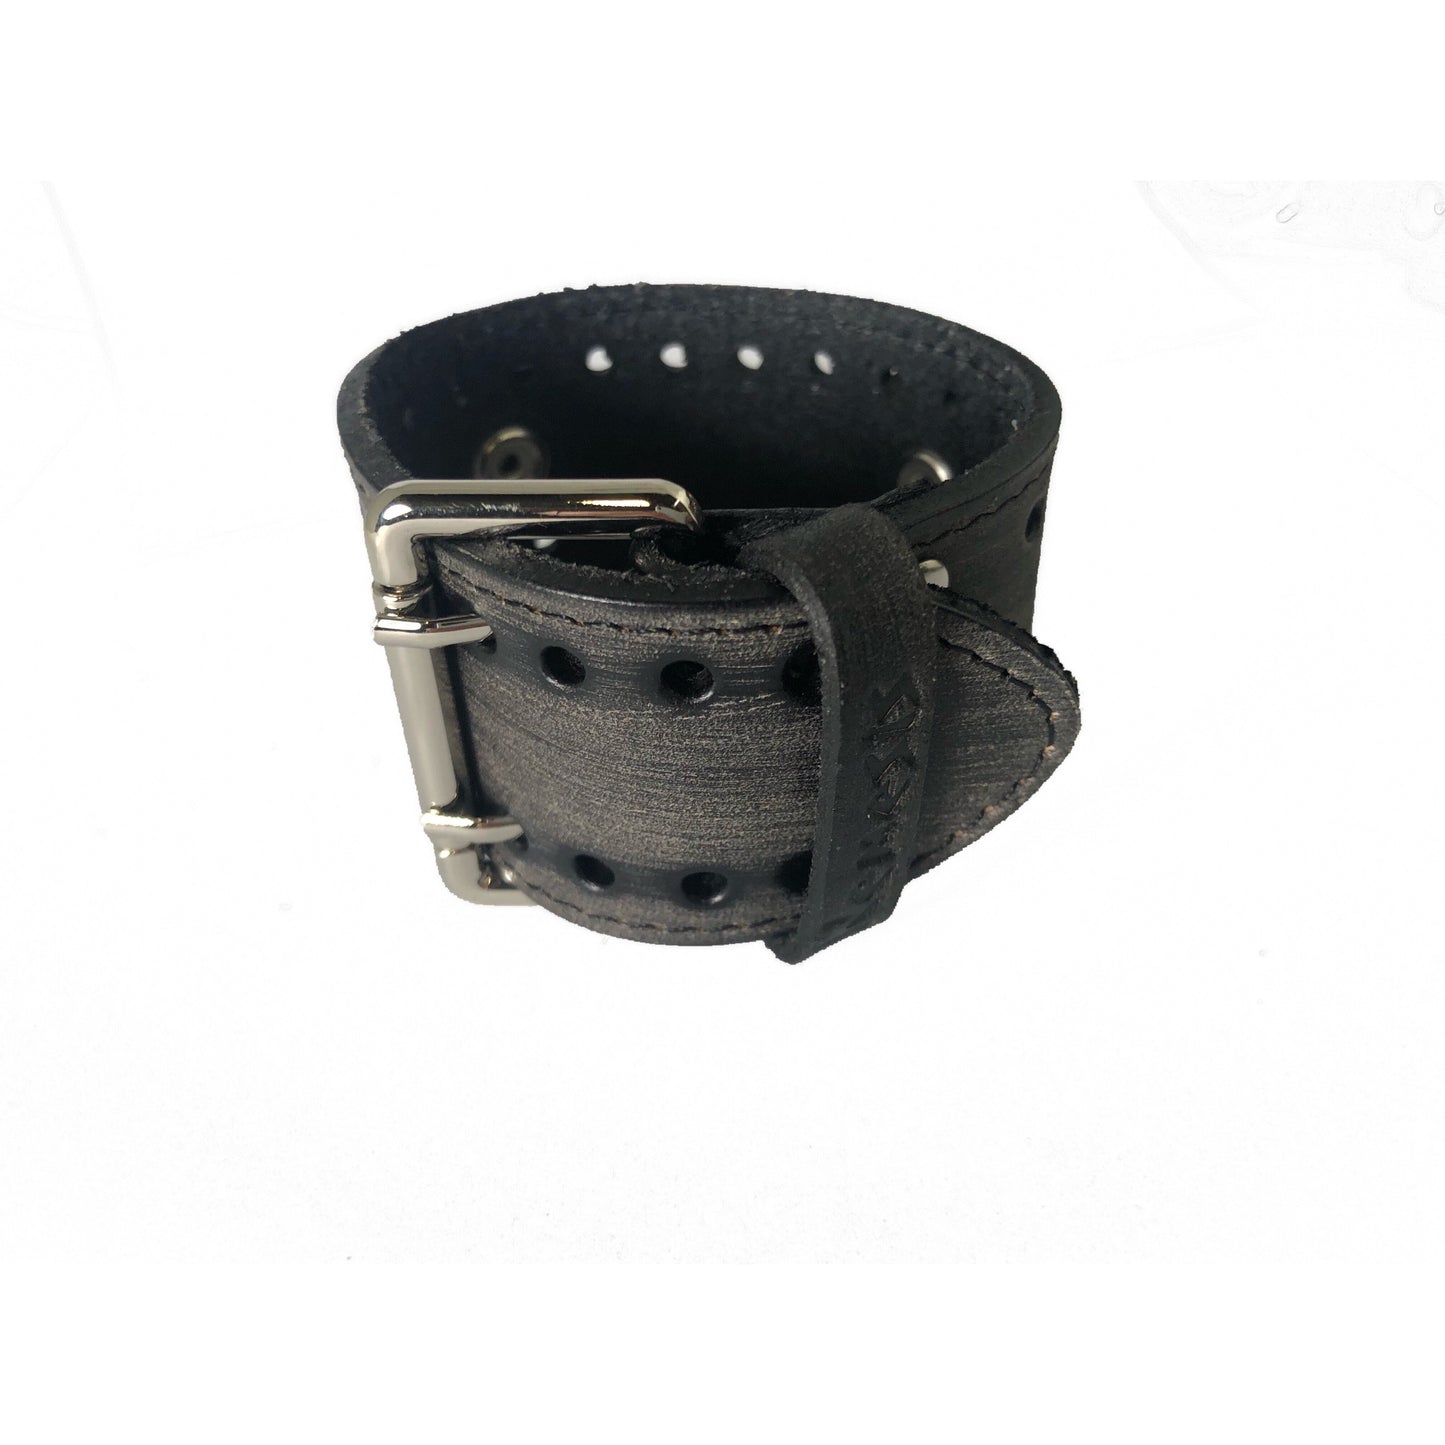  Perforated  Leather Cuff